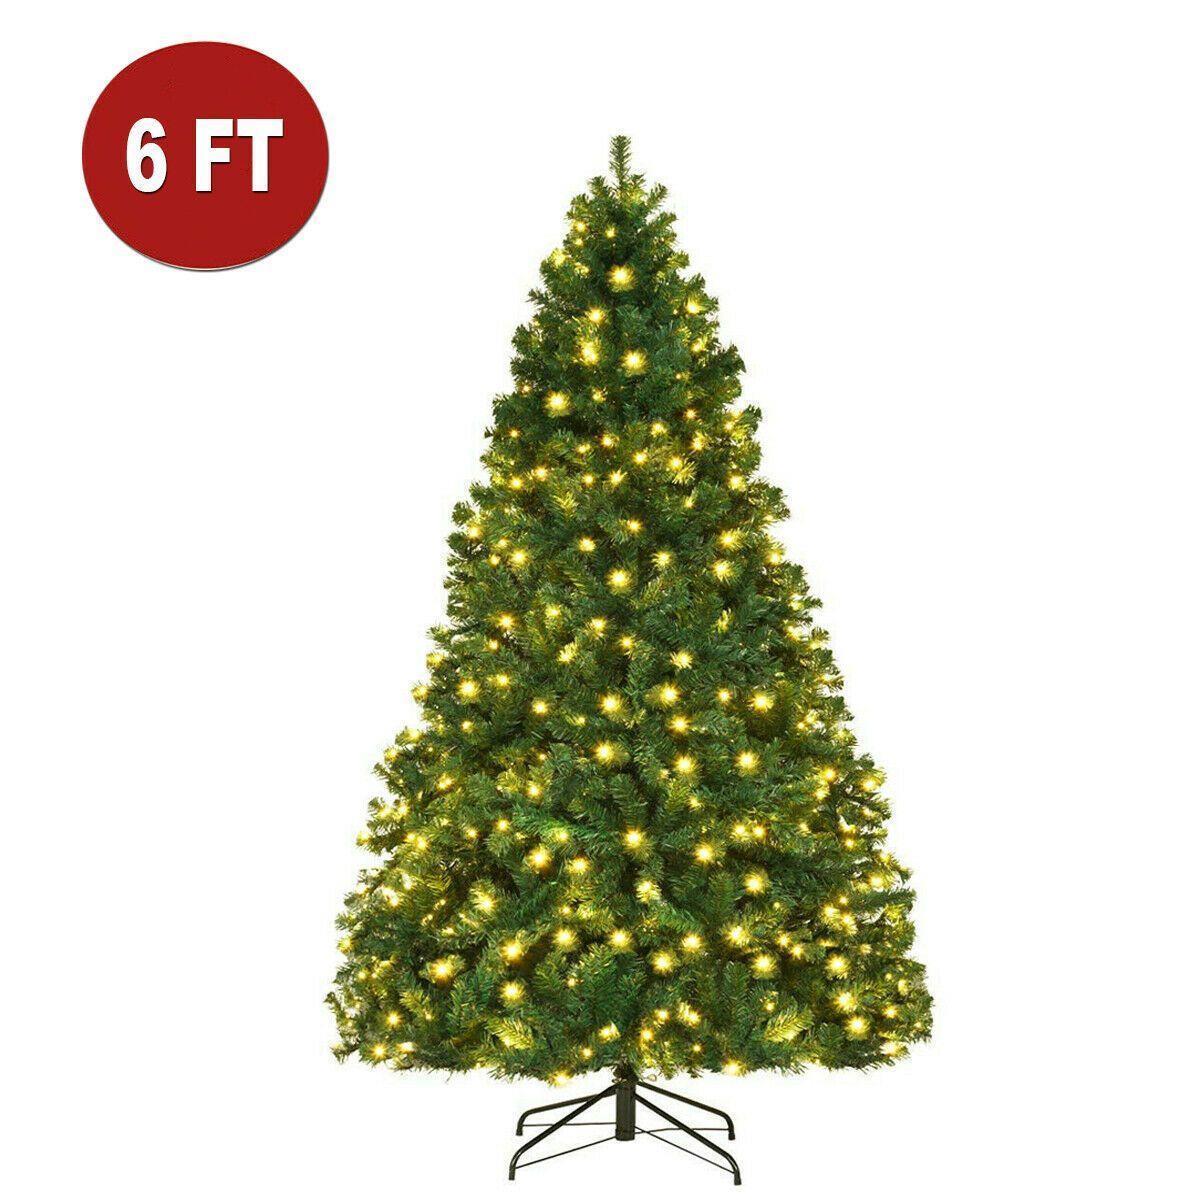 6 FT + LED LIGHTS-Christmas Trees with Led Lights Decoration for Christmas Parties